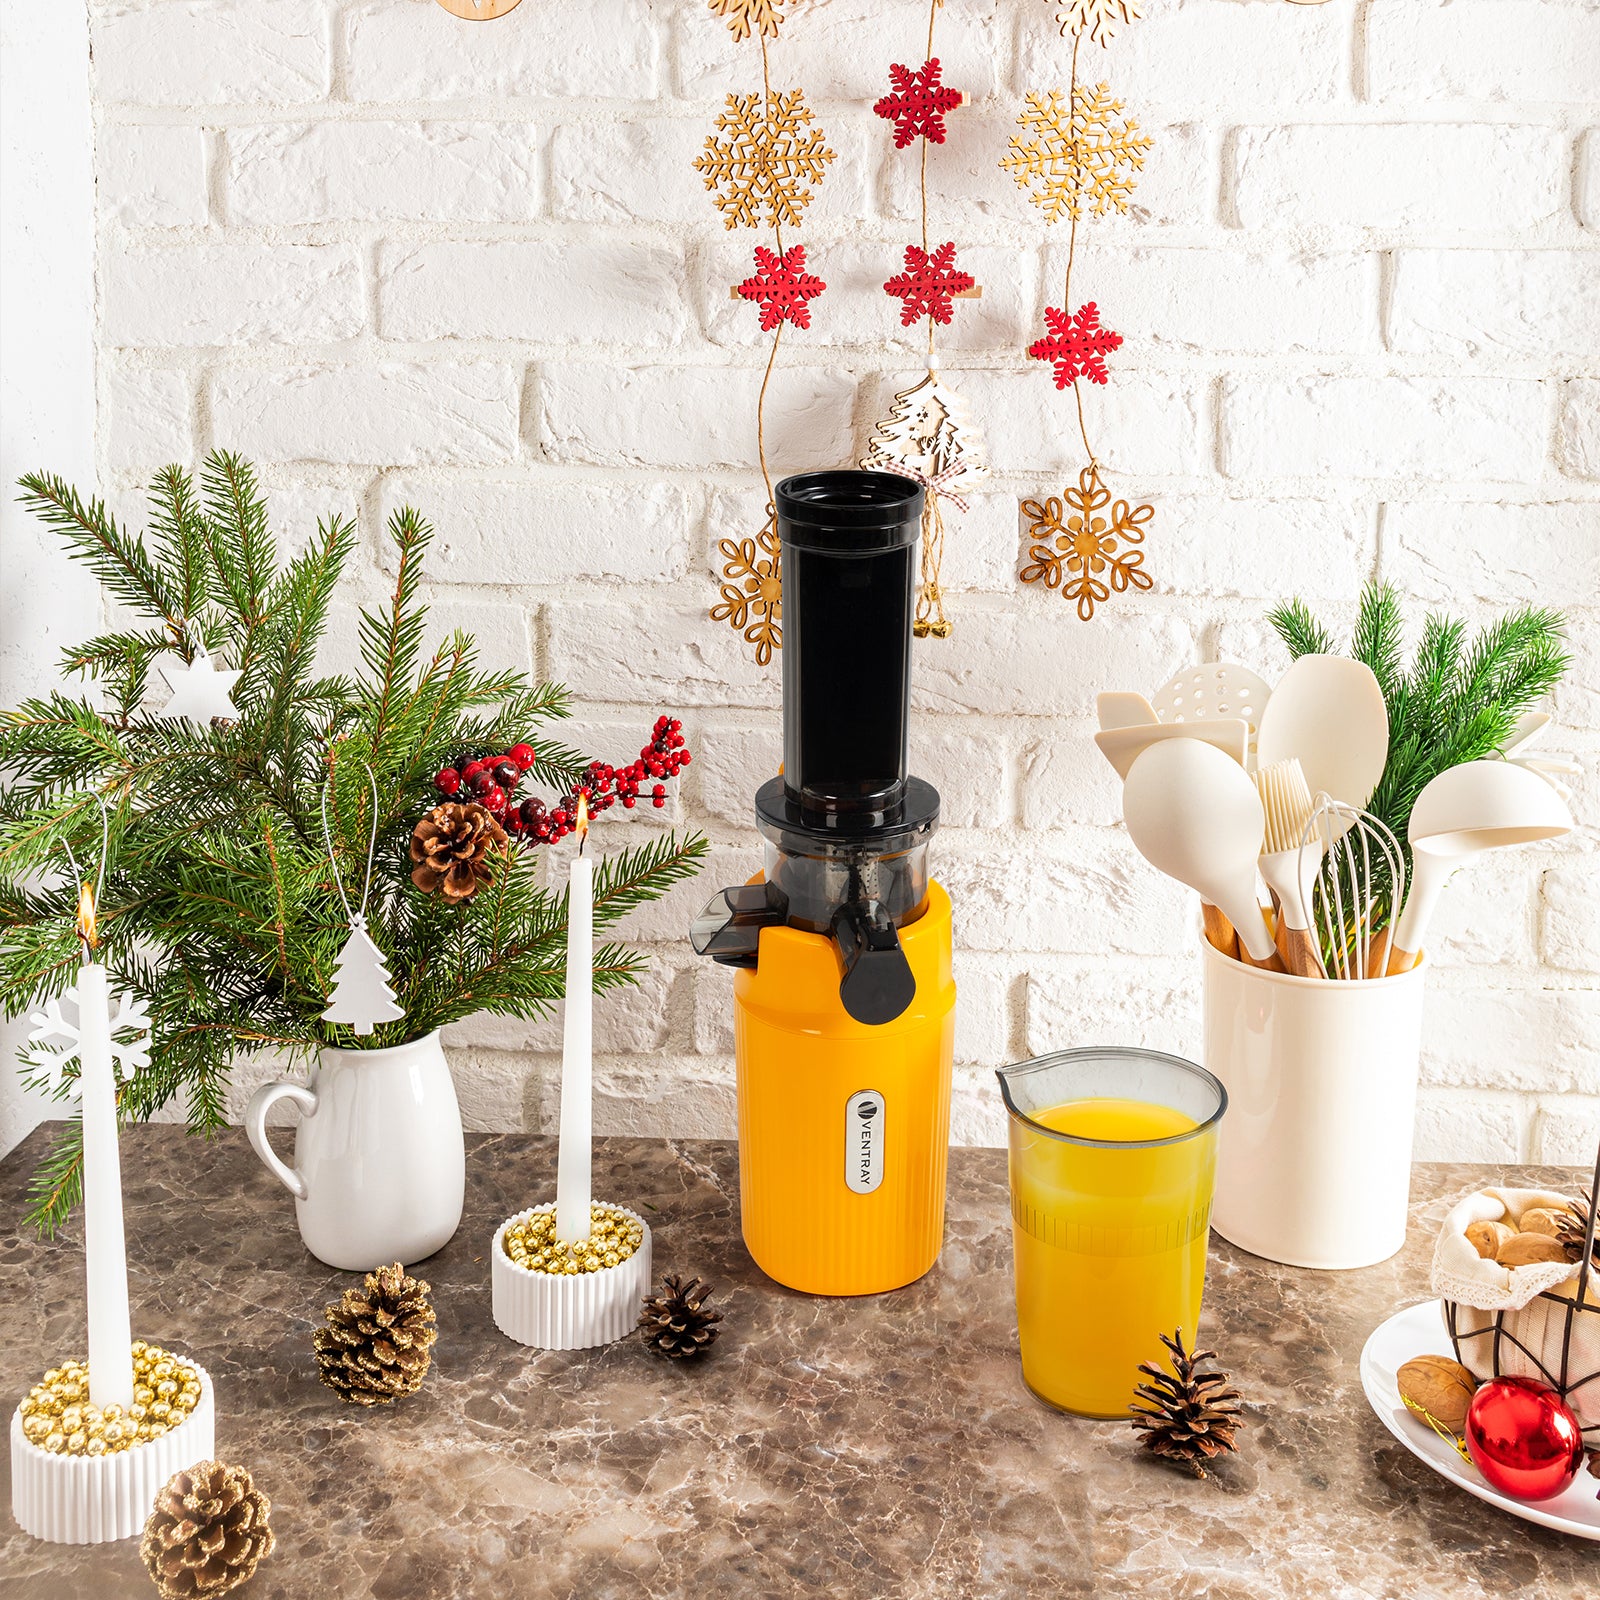 Ventray Yellow Ginnie Juicer is on the table, next to juice, candle and Christmas decoration